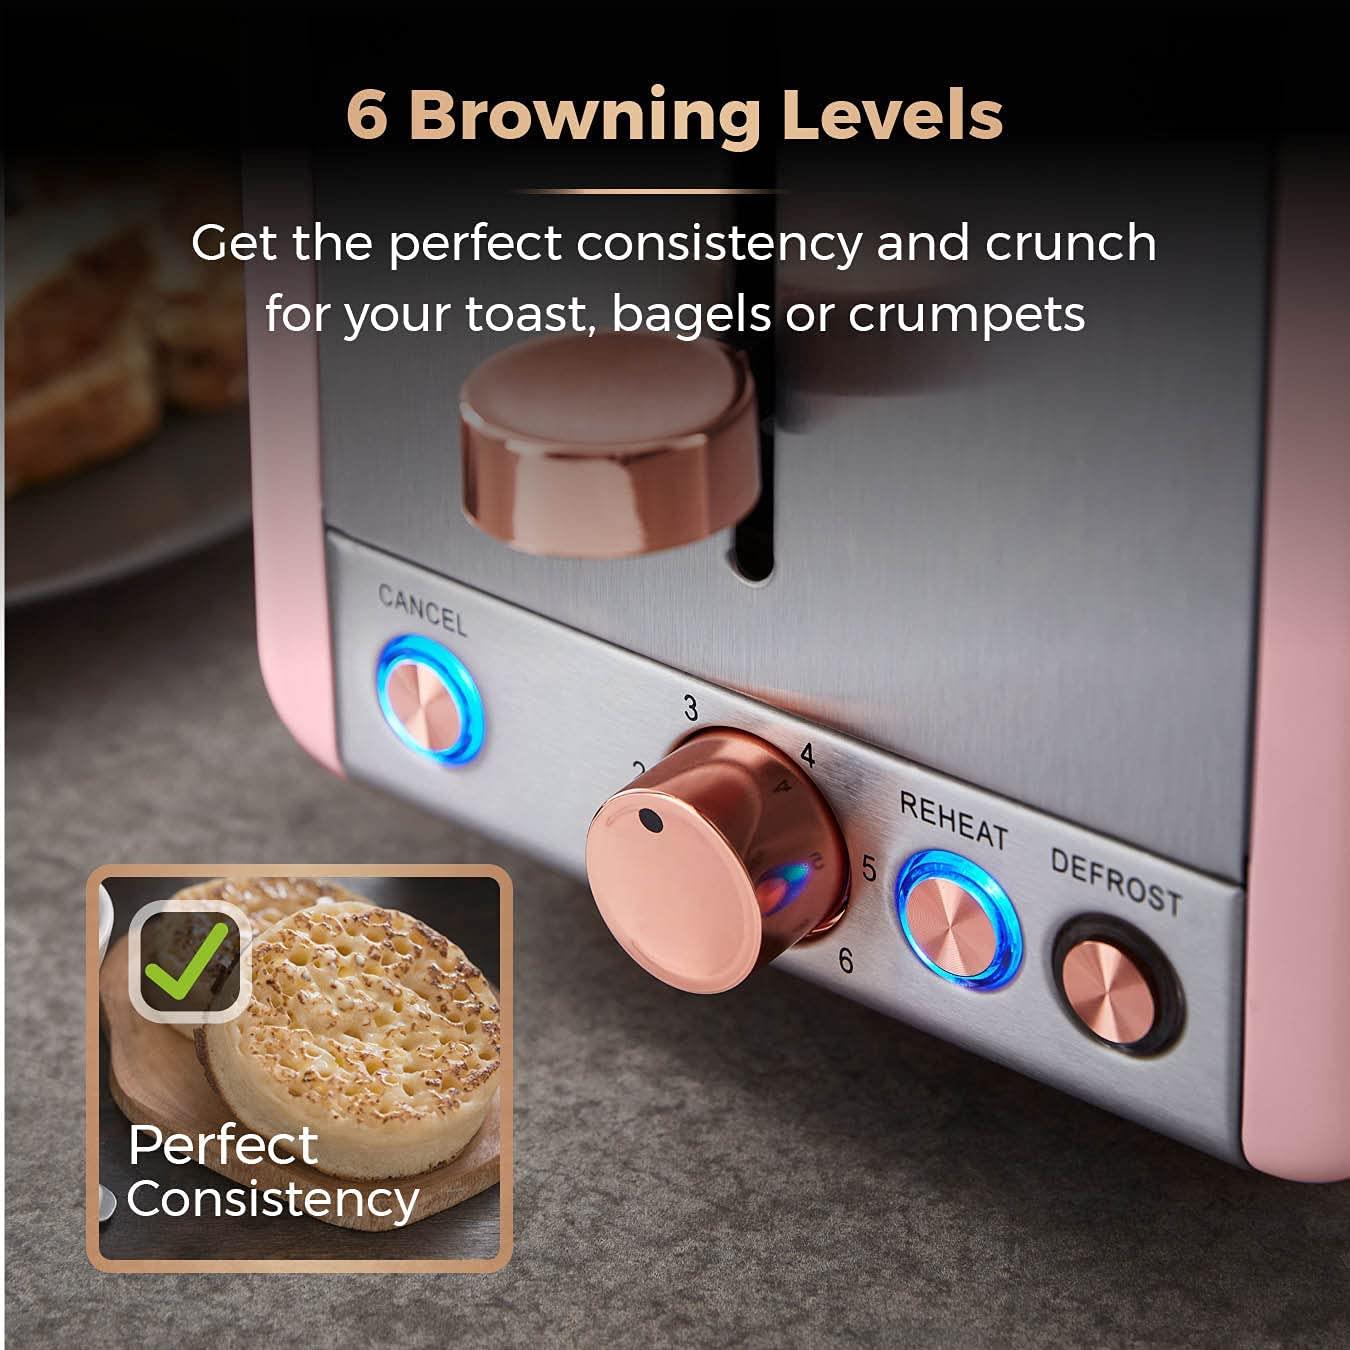 Tower Cavaletto 850W 2 Slice Stainless Steel Toaster - Pink / Gold